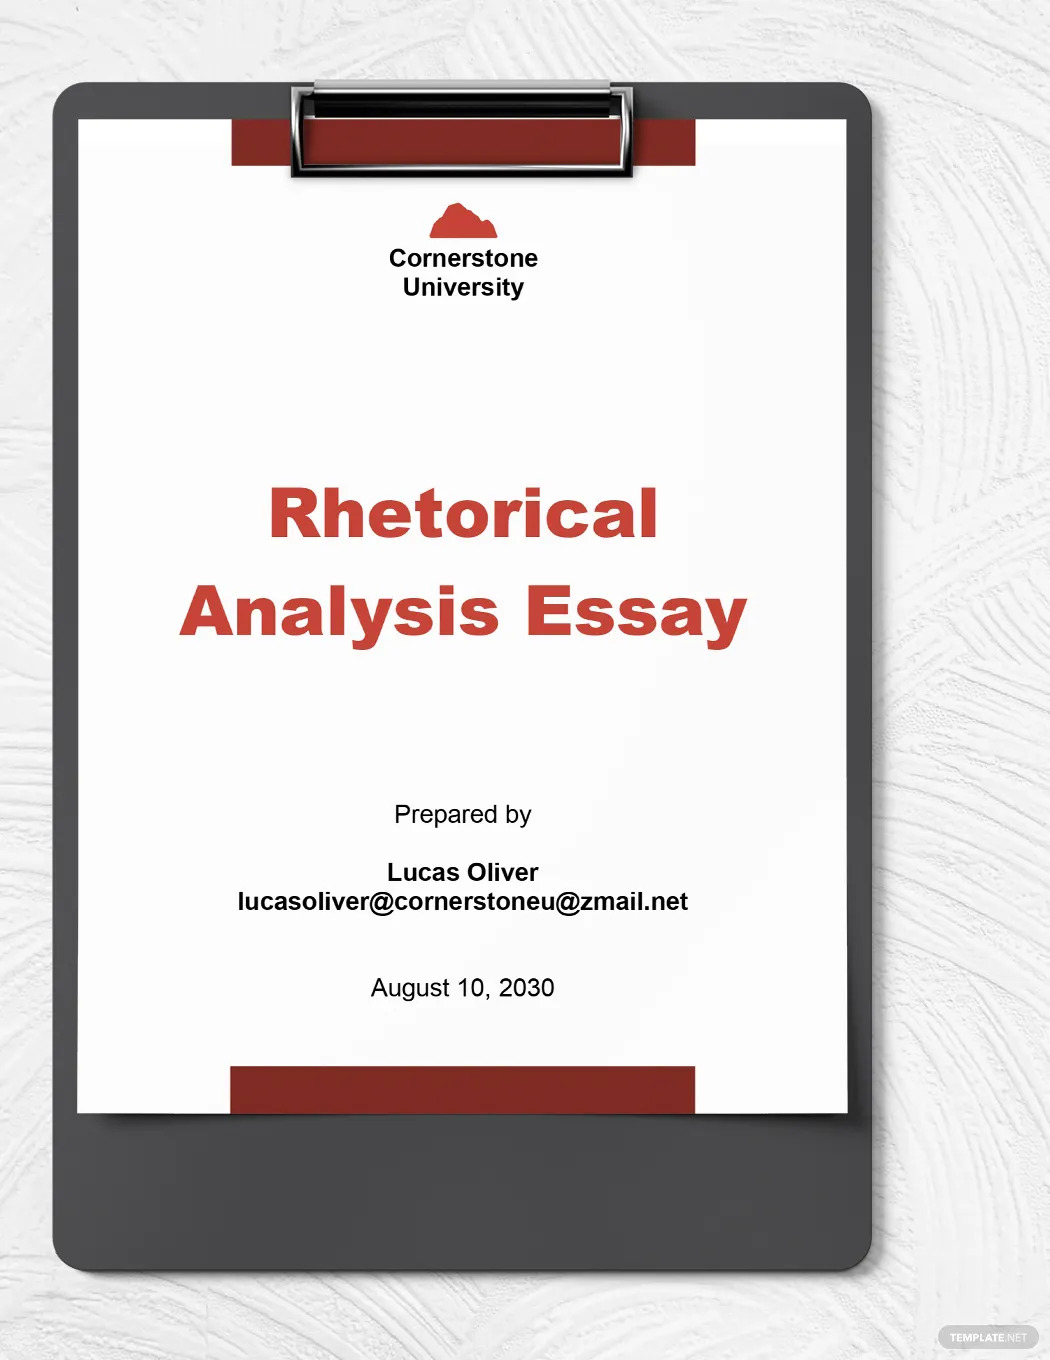 analysis-essay-ideas-and-examples